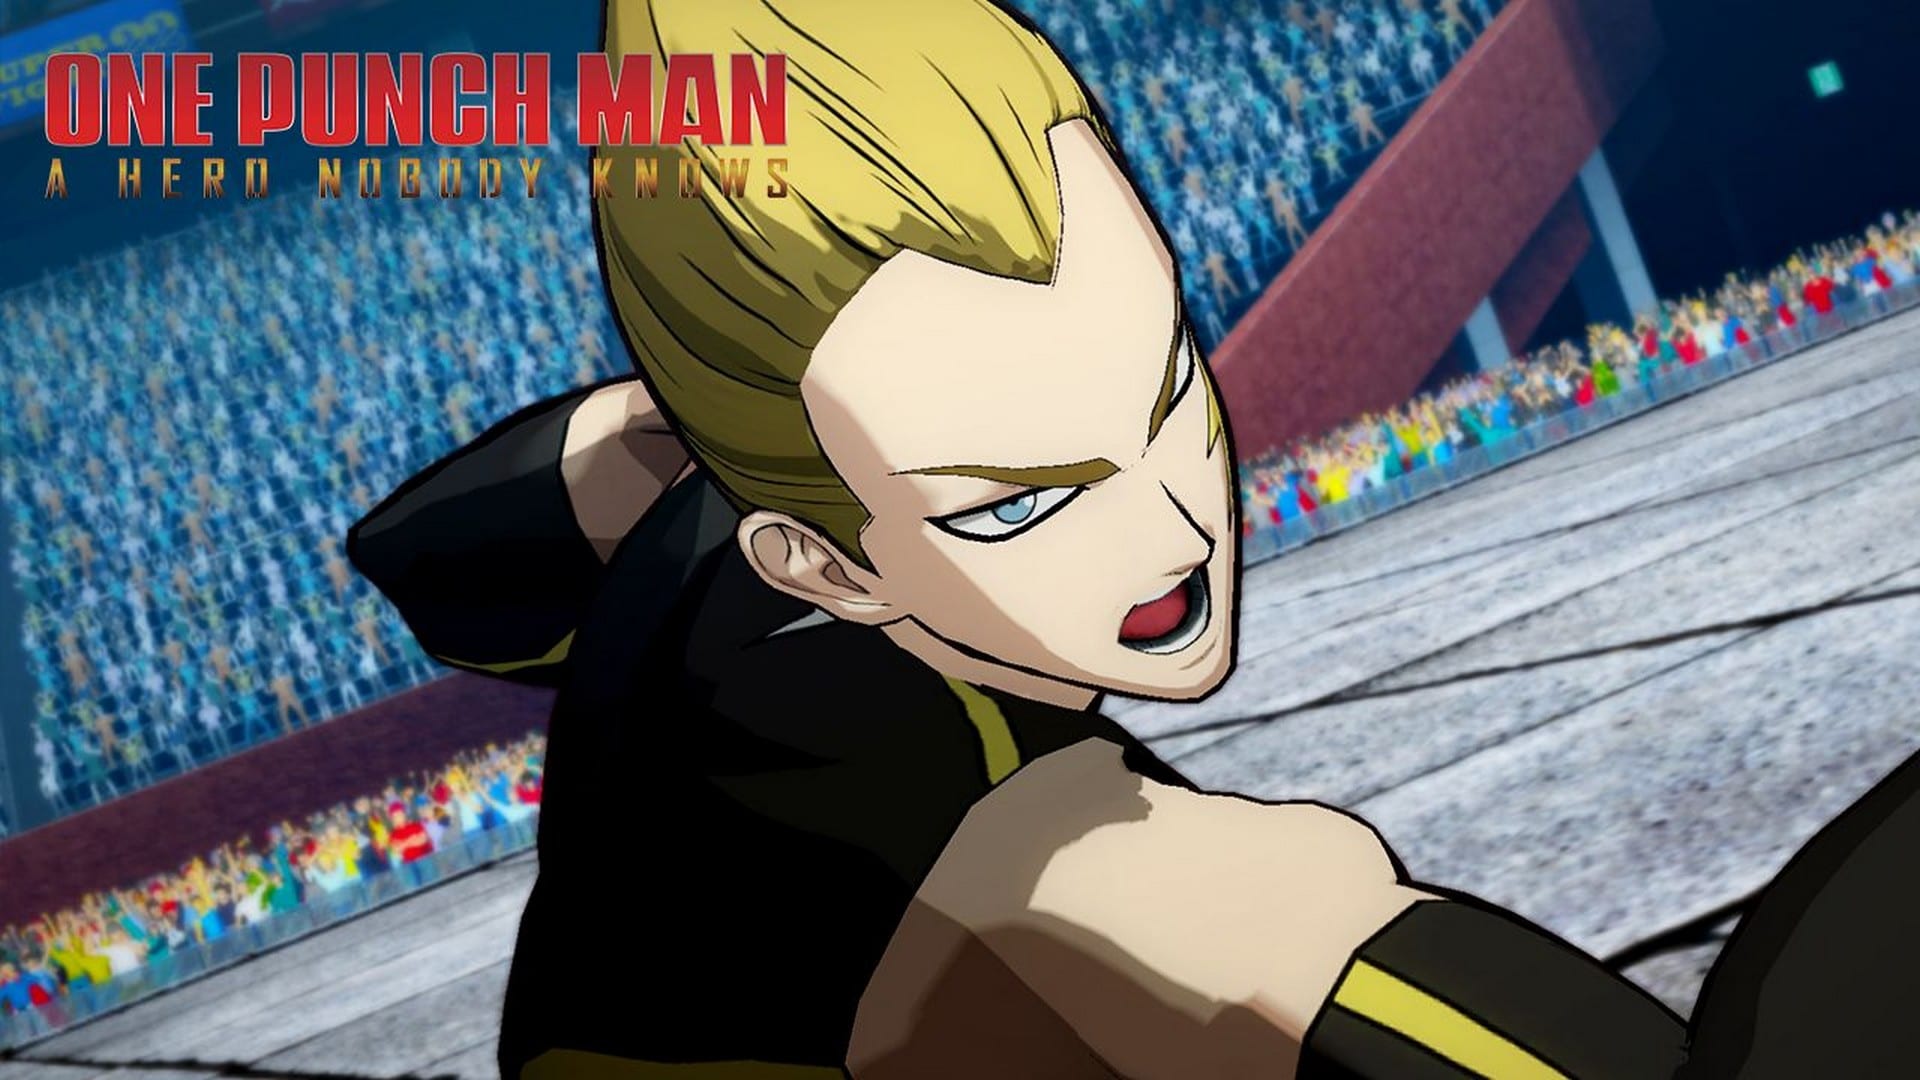 Lightning Max To Join The One Punch Man: A Hero Nobody Knows’ Roster